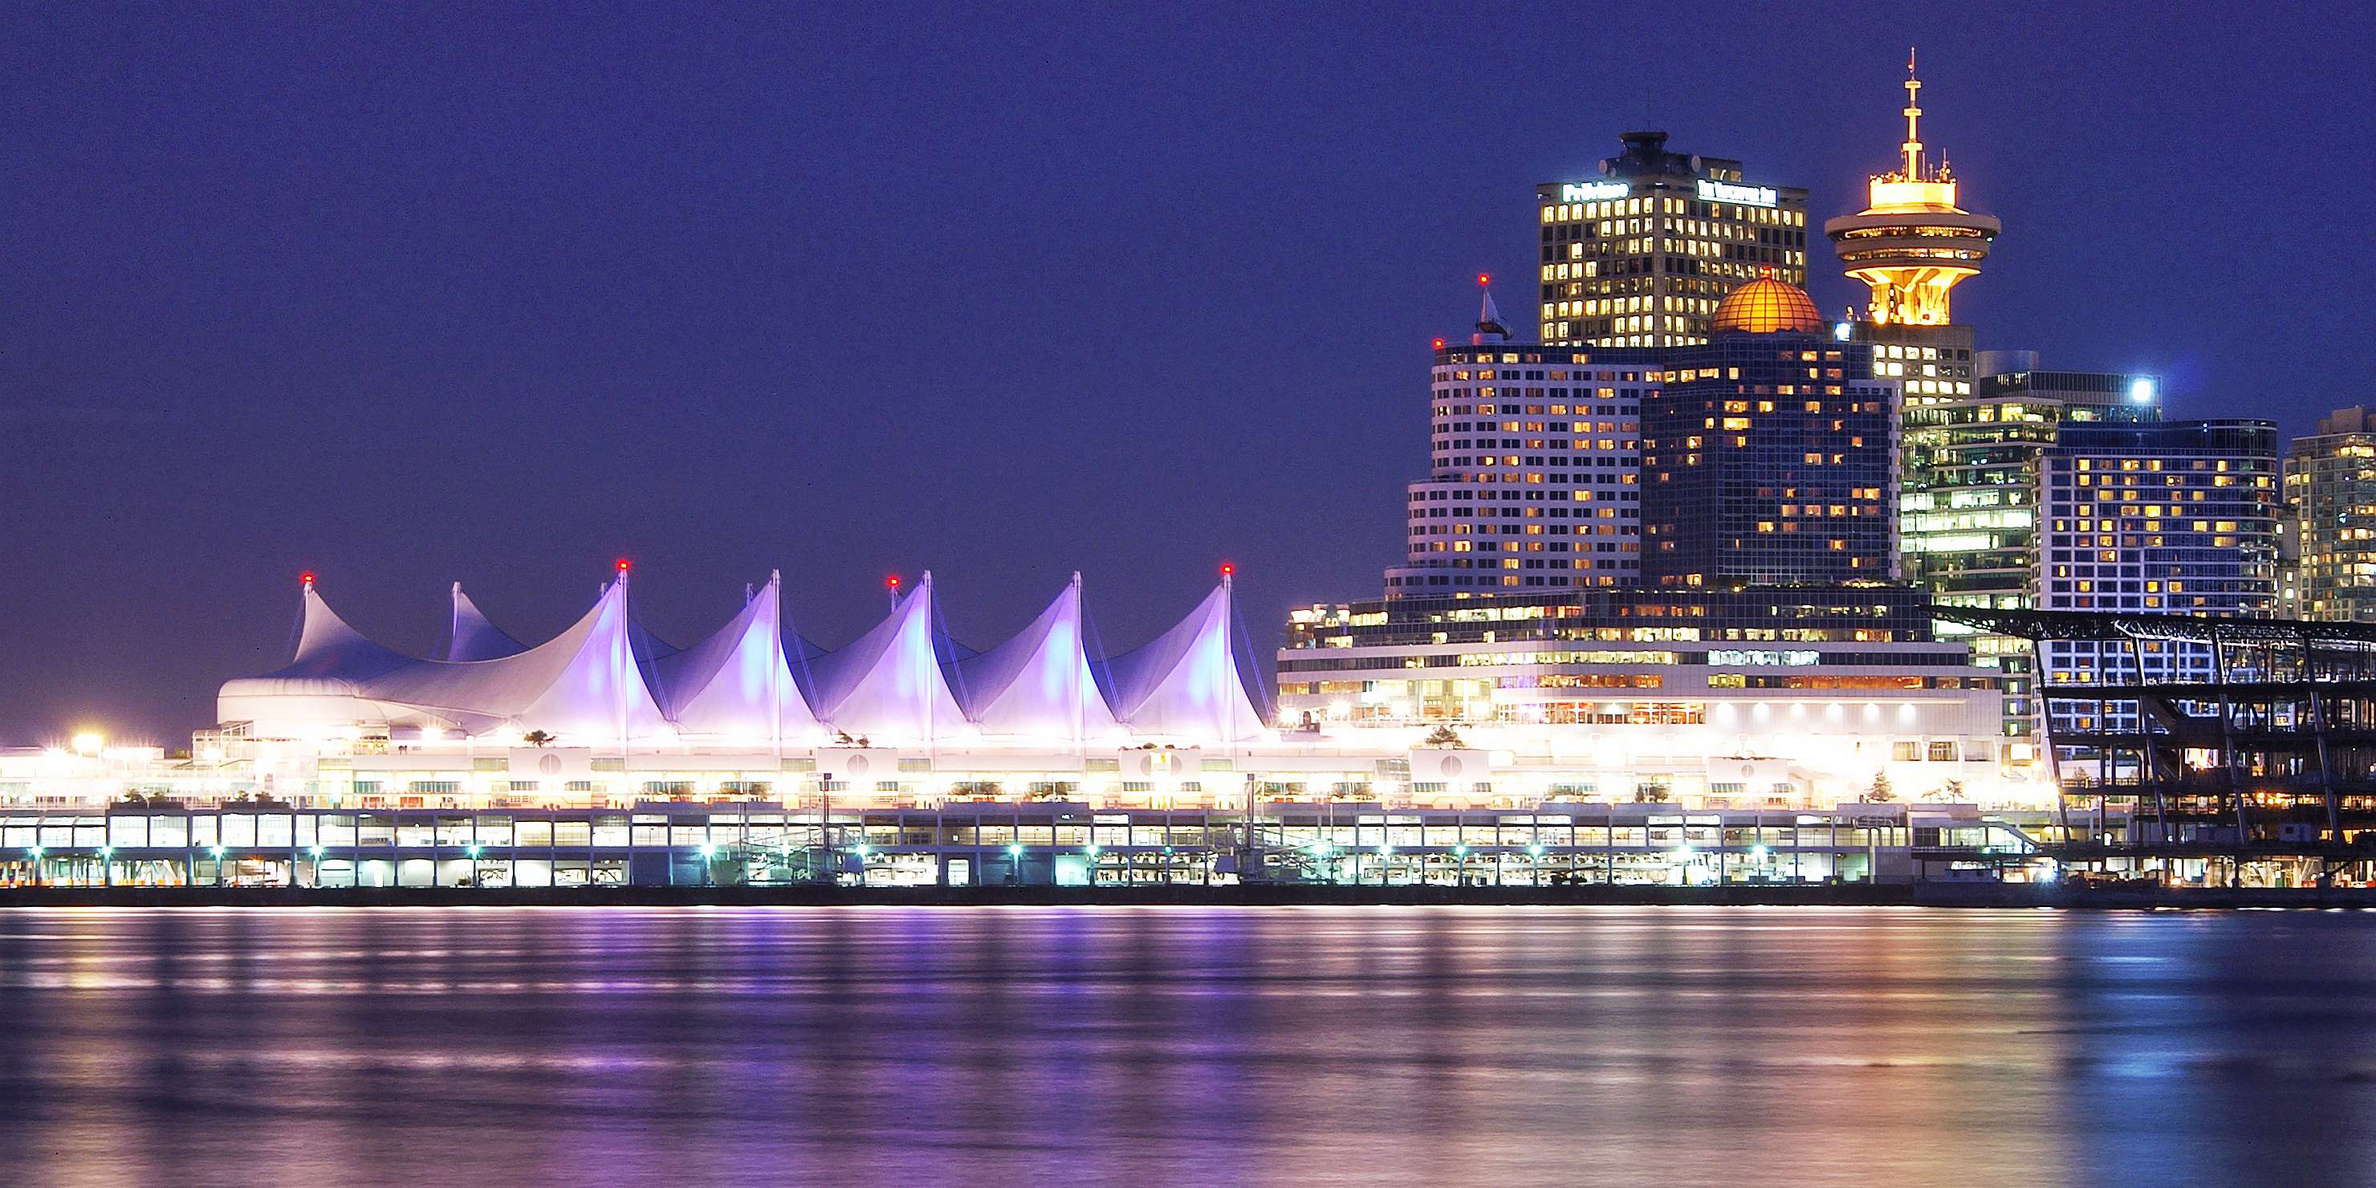 Vancouver  |  Canada Place at night